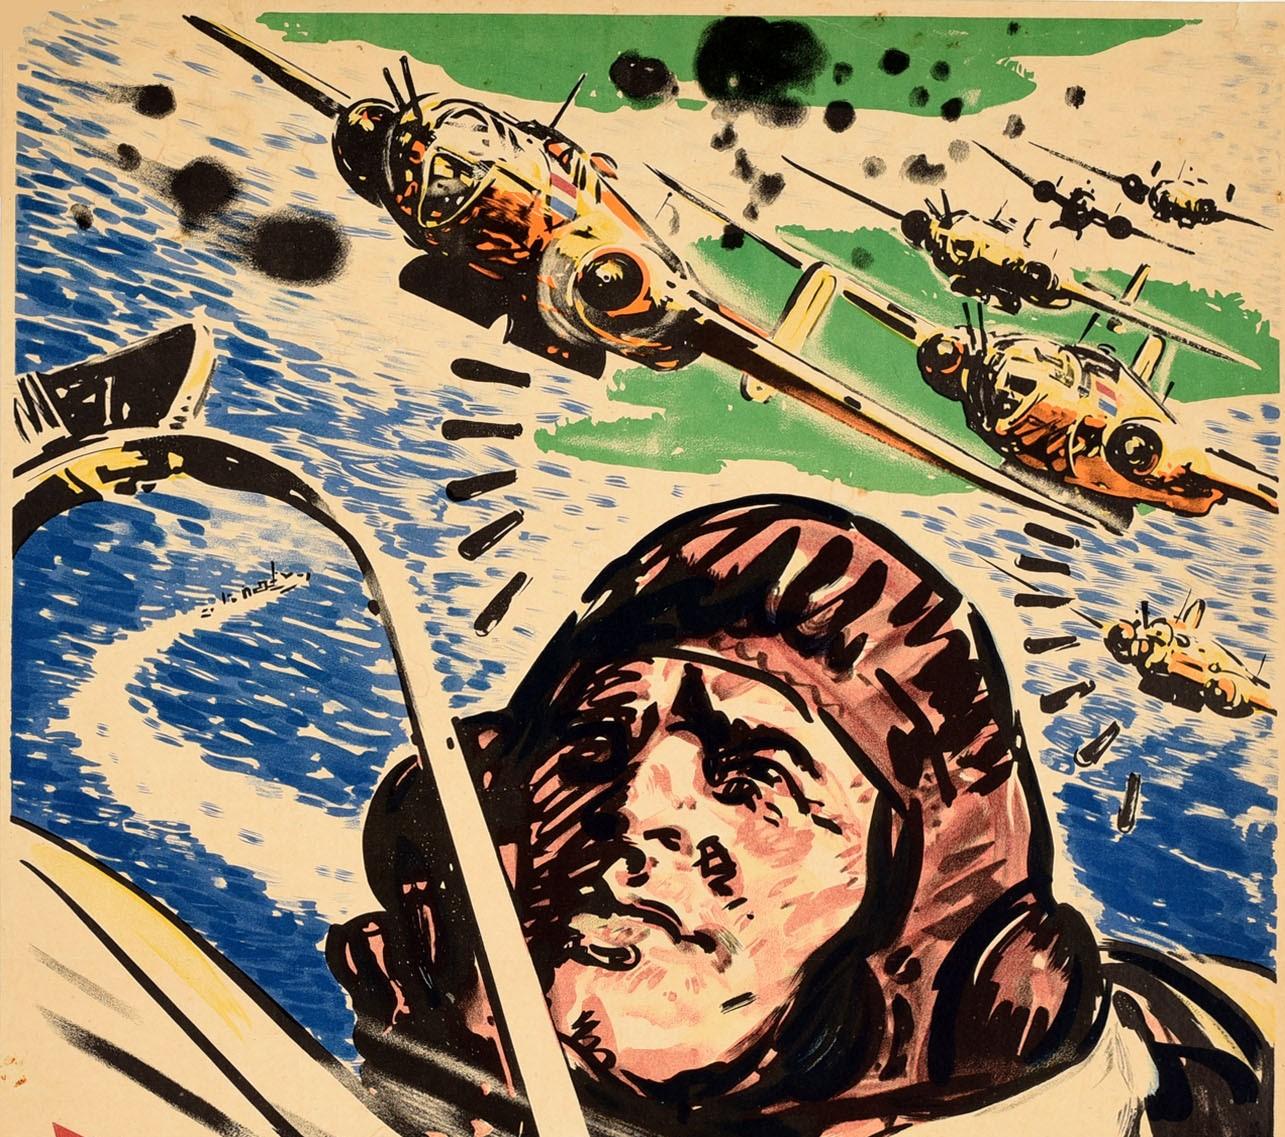 Original vintage World War Two poster, Indie bevrijden Een nieuwe taak voor den Vliegenden Hollander / Liberate India Dutch East Indies A new task for The Flying Dutchman - featuring a dynamic image of a fighter pilot in his plane marked with the